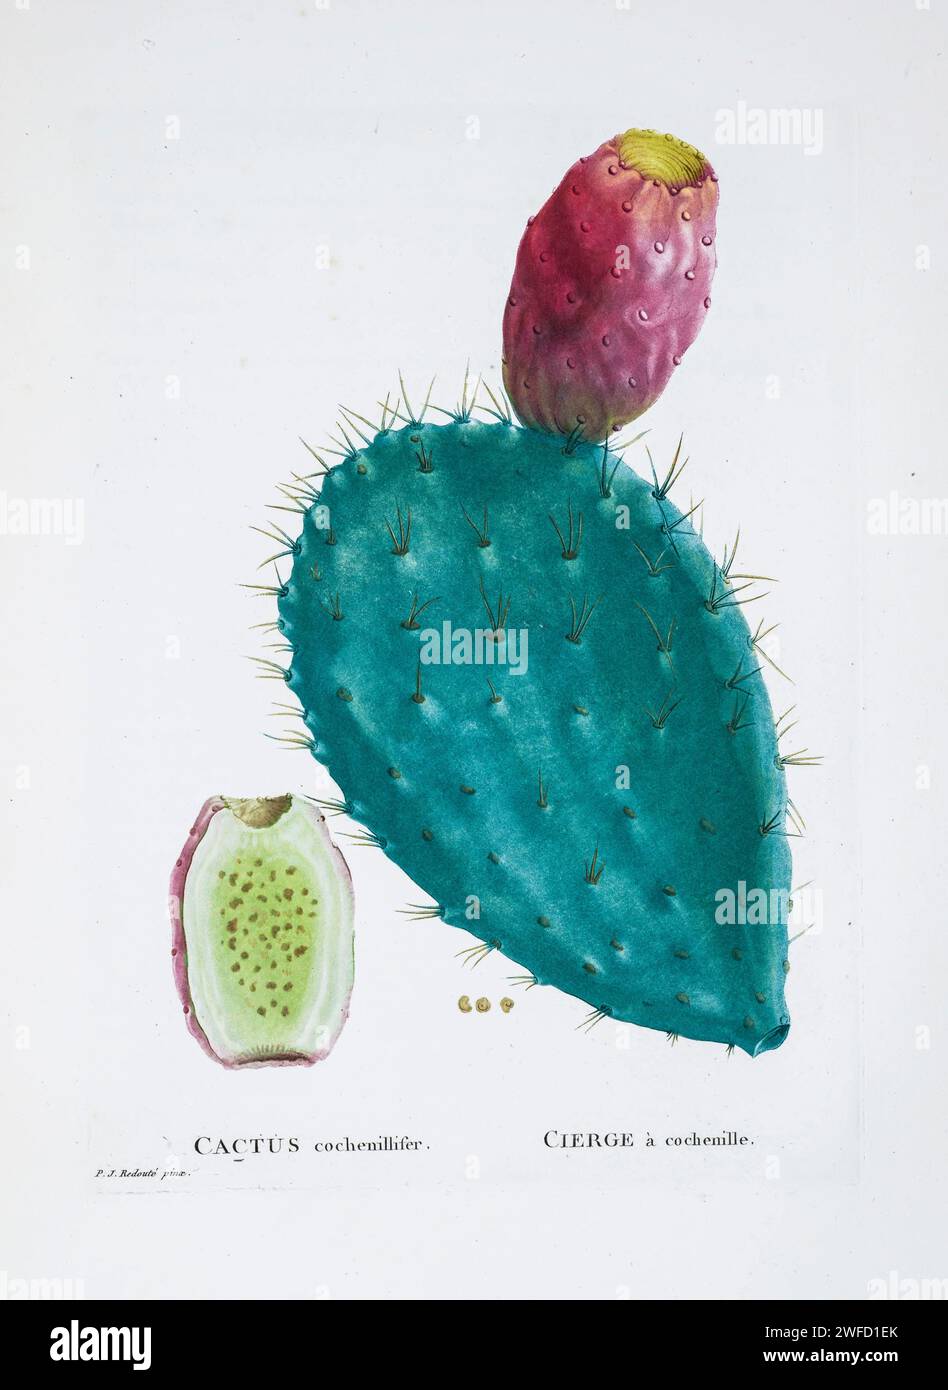 Opuntia tomentosa S.D. Here As Cactus coccinellifer (cochenillifer on plates) from History of Succulent Plants [Plantarum historia succulentarum / Histoire des plantes grasses] painted by Pierre-Joseph Redouté and described by Augustin Pyramus de Candolle 1799 Opuntia tomentosa, commonly called woollyjoint pricklypear or velvety tree pear, is a species of Opuntia found in Mexico Stock Photo